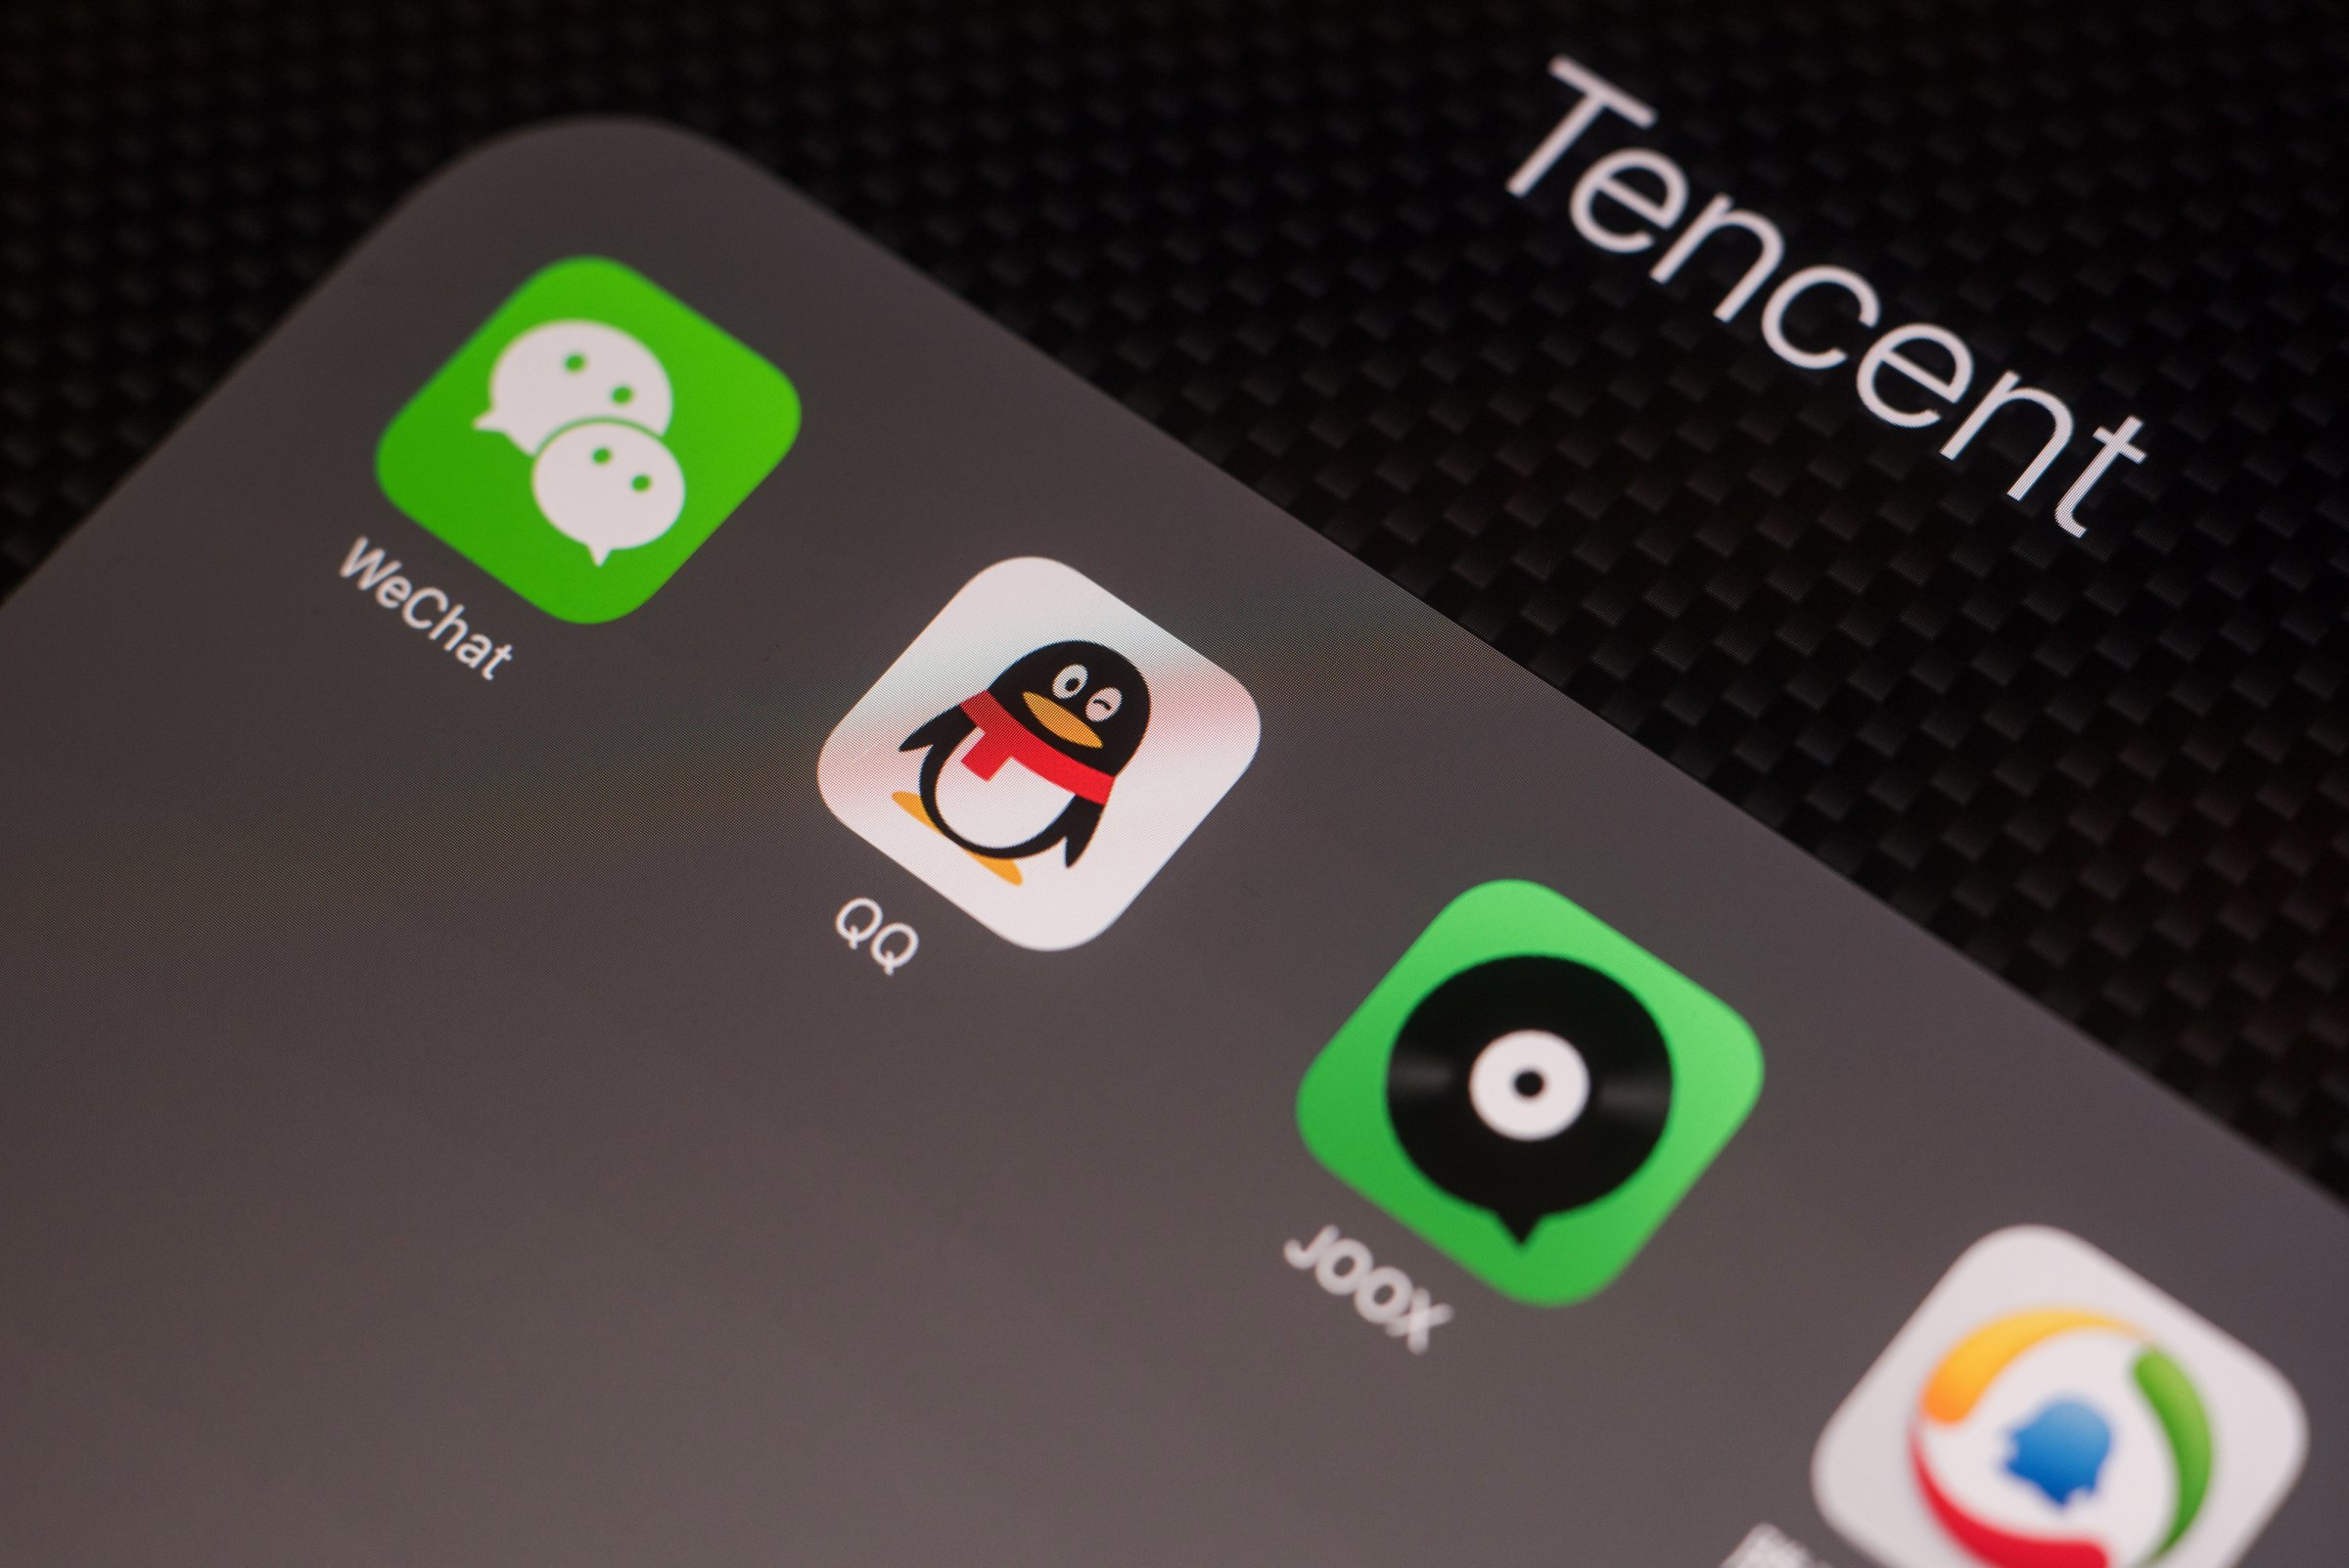 General Images of Tencent Holdings Ltd. Applications Ahead of Earnings Report